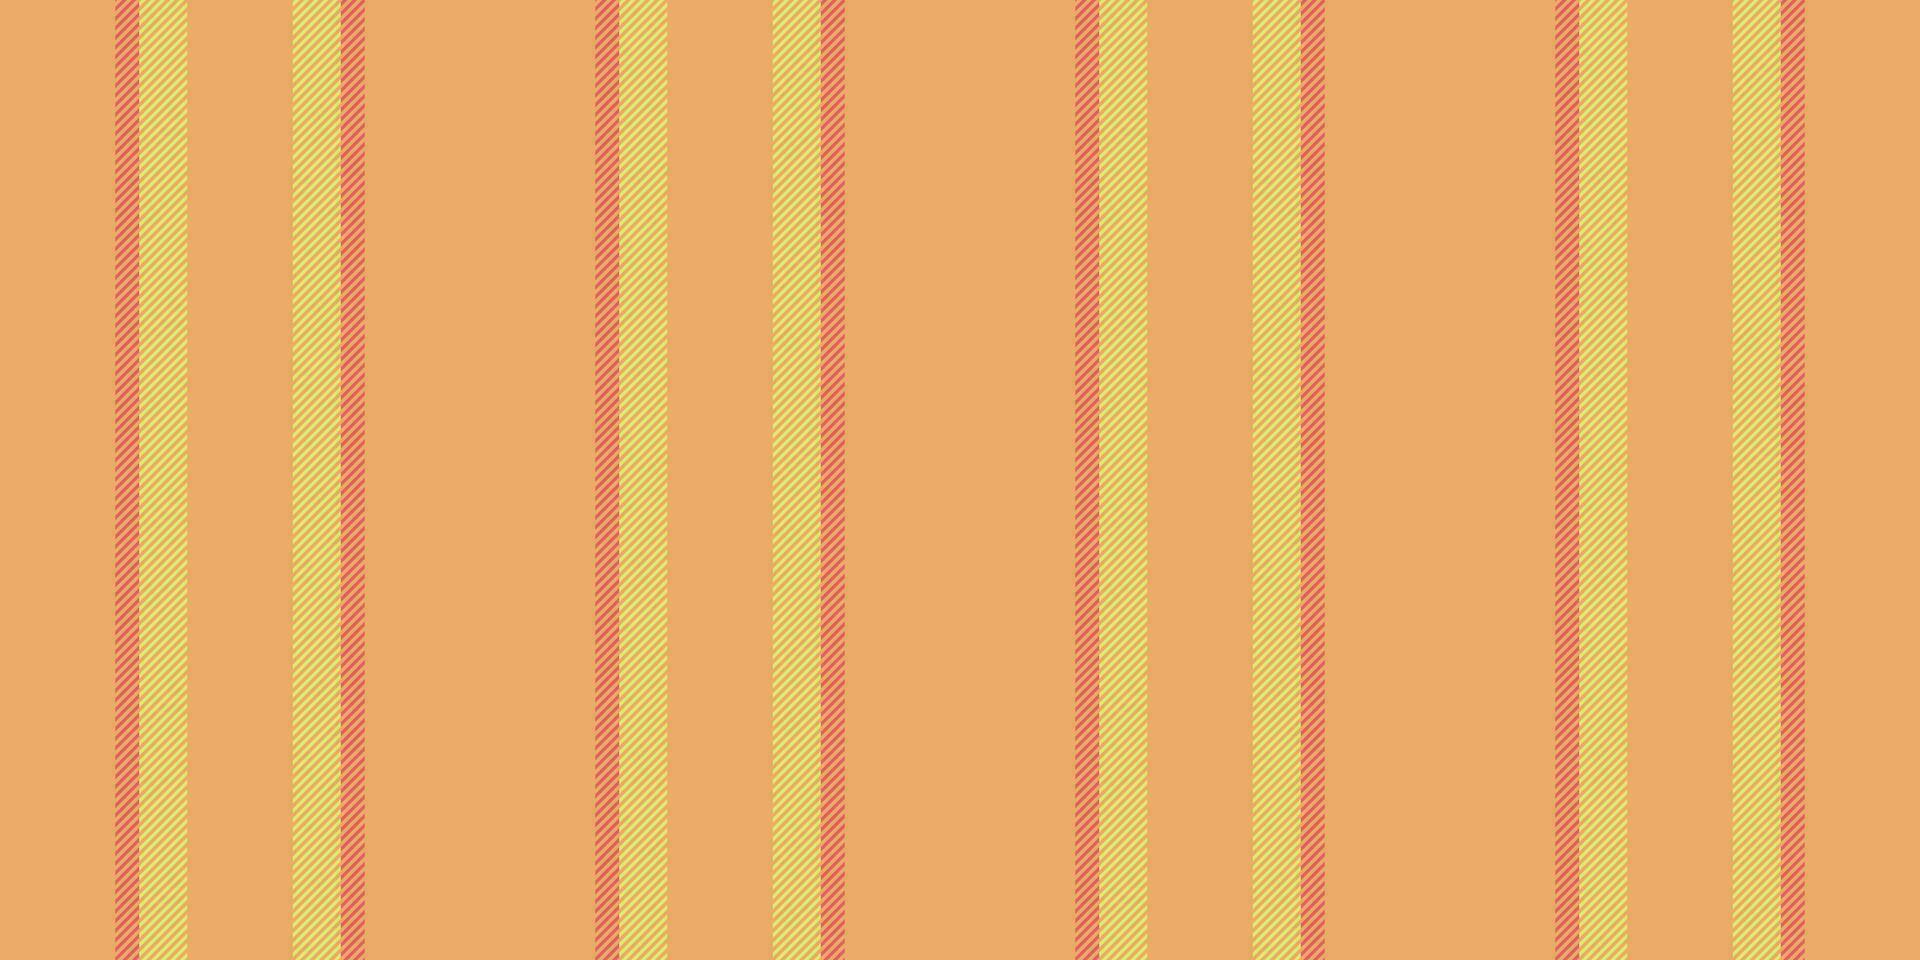 Content lines seamless pattern, clothes vertical background texture. Desert vector fabric stripe textile in orange and lime colors.